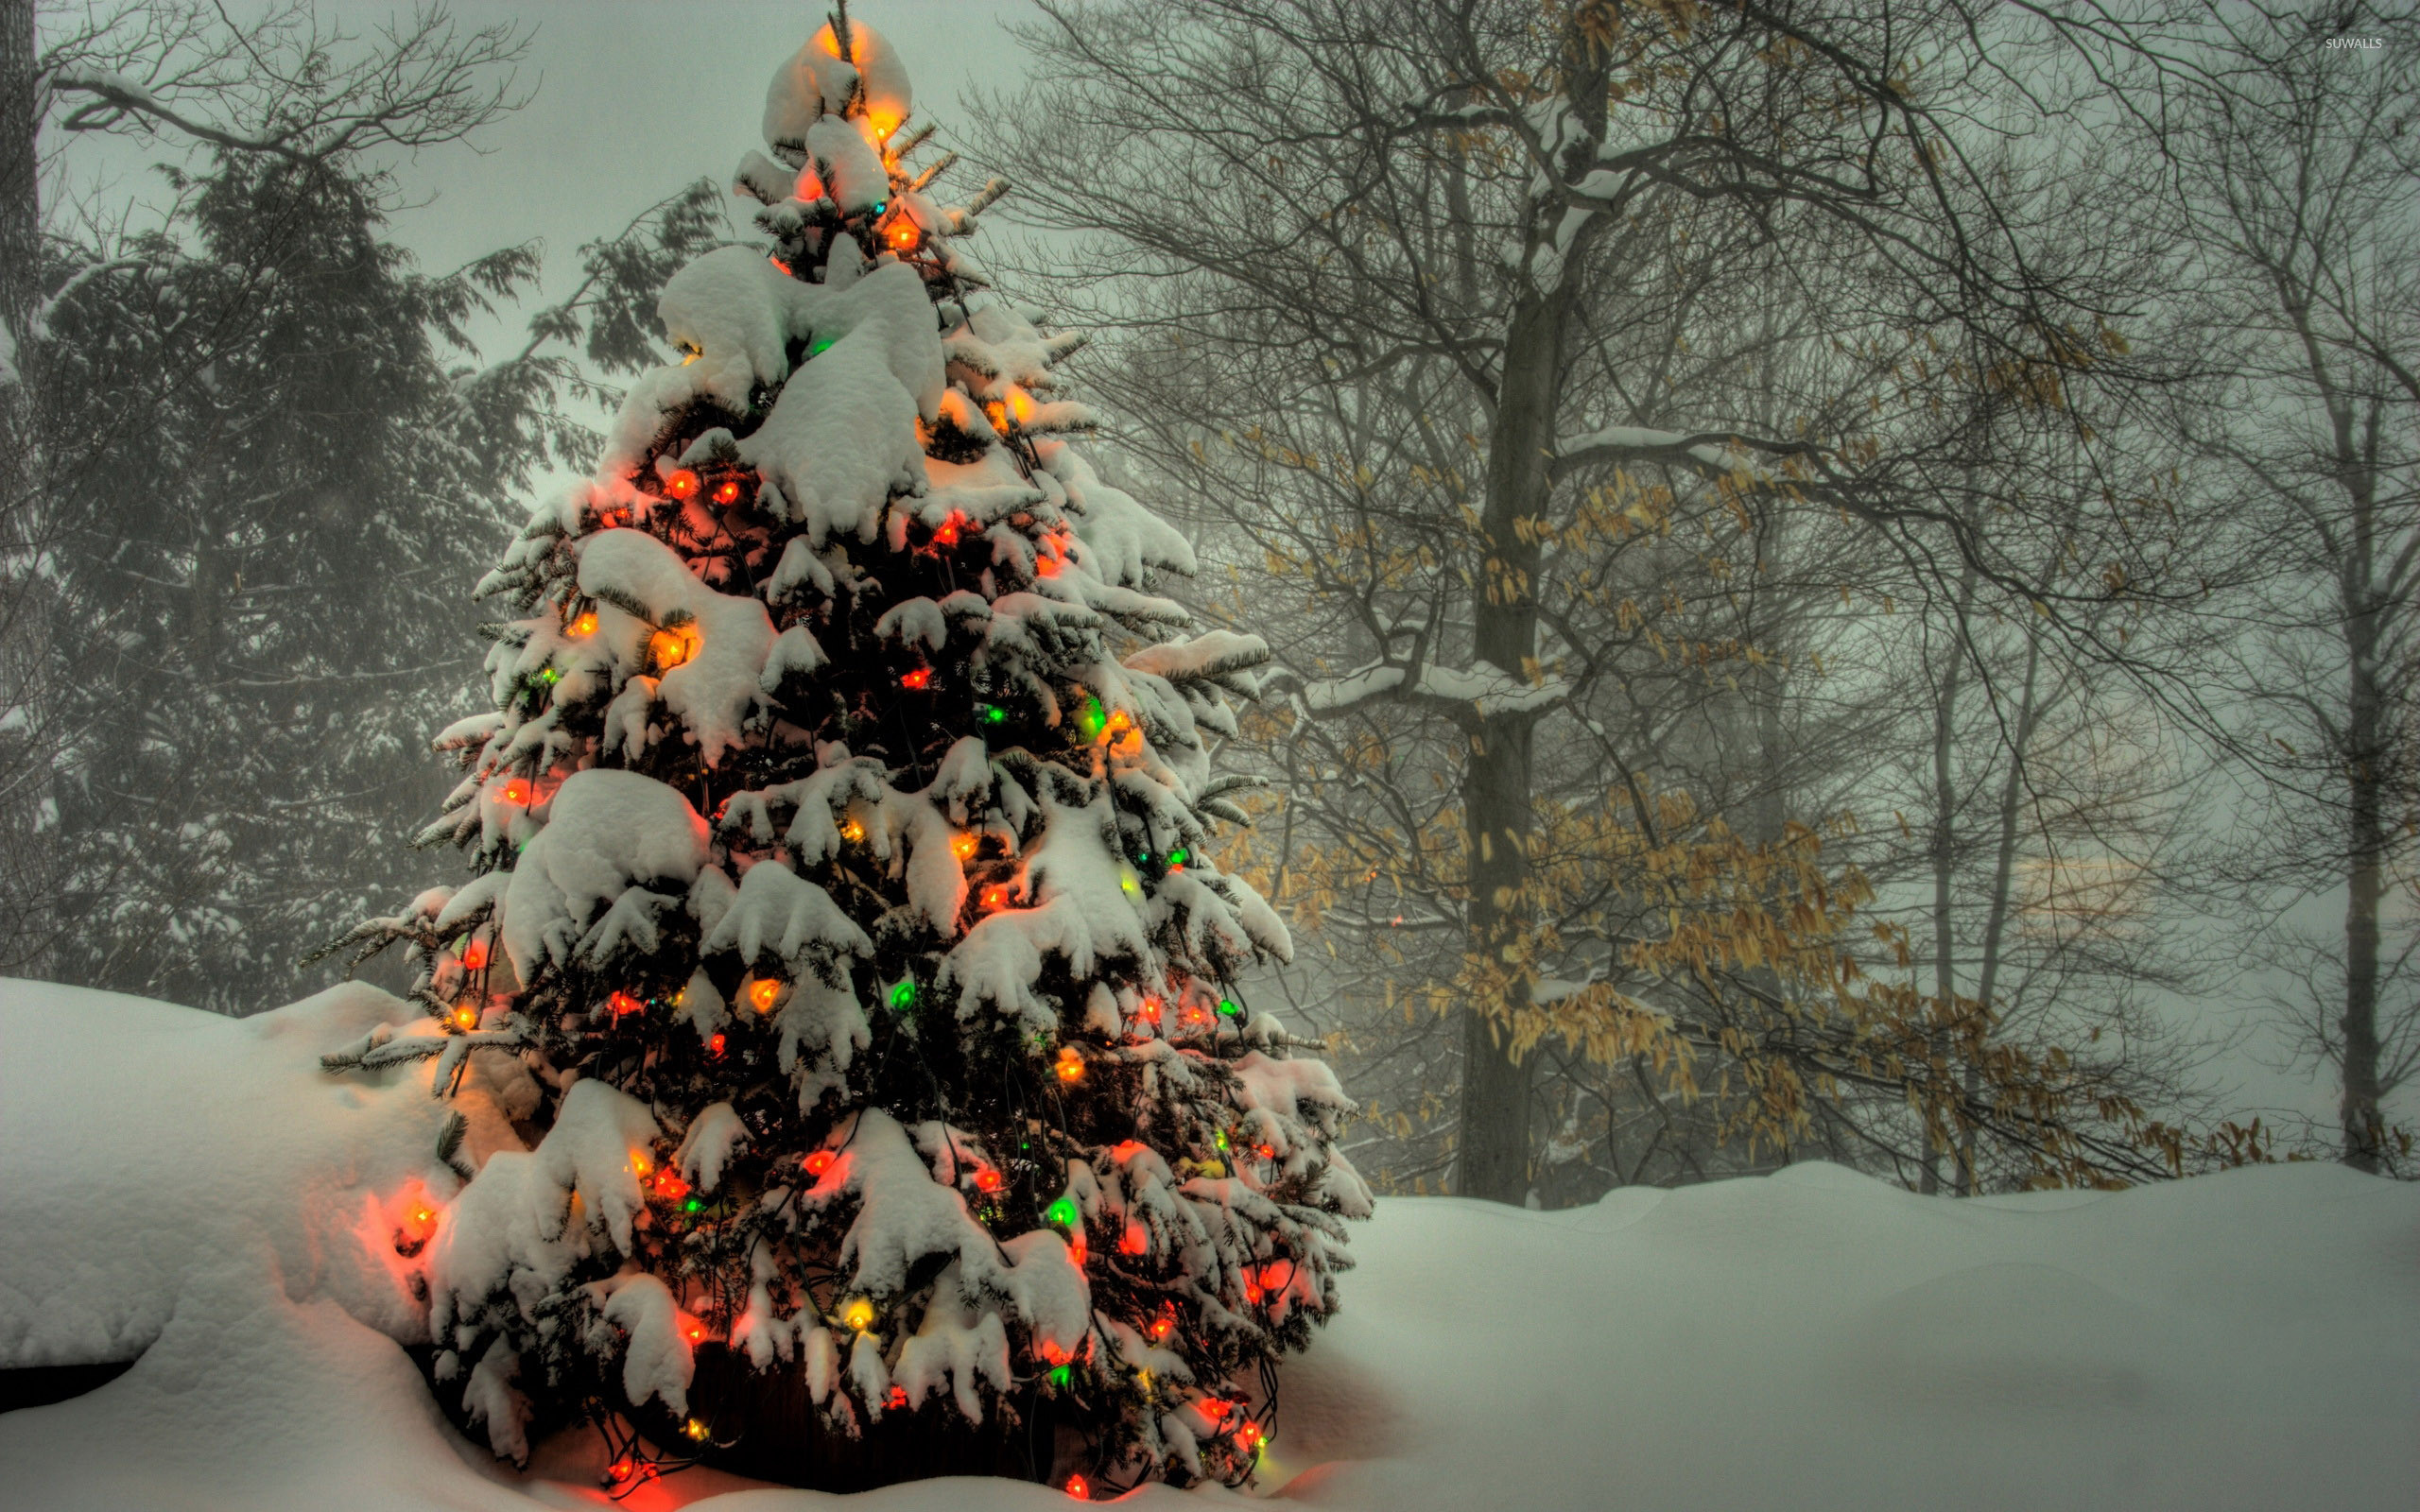 2560x1600 Christmas tree shining in the snowy forest wallpaper  jpg